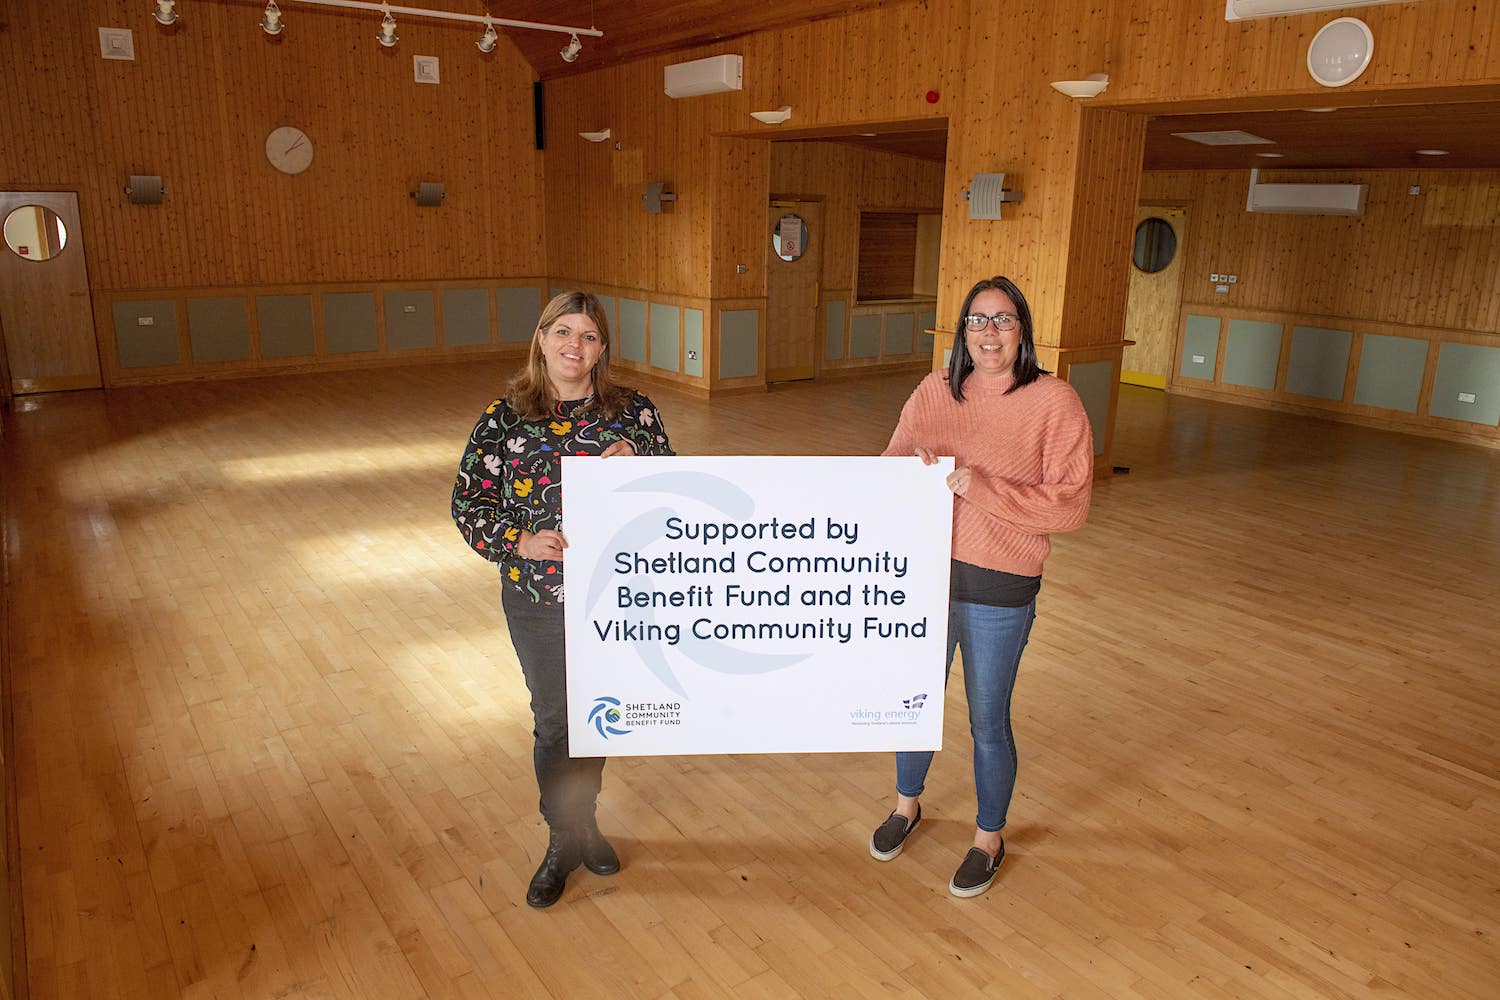 Over half a million pounds of Viking community grants paid out to local projects